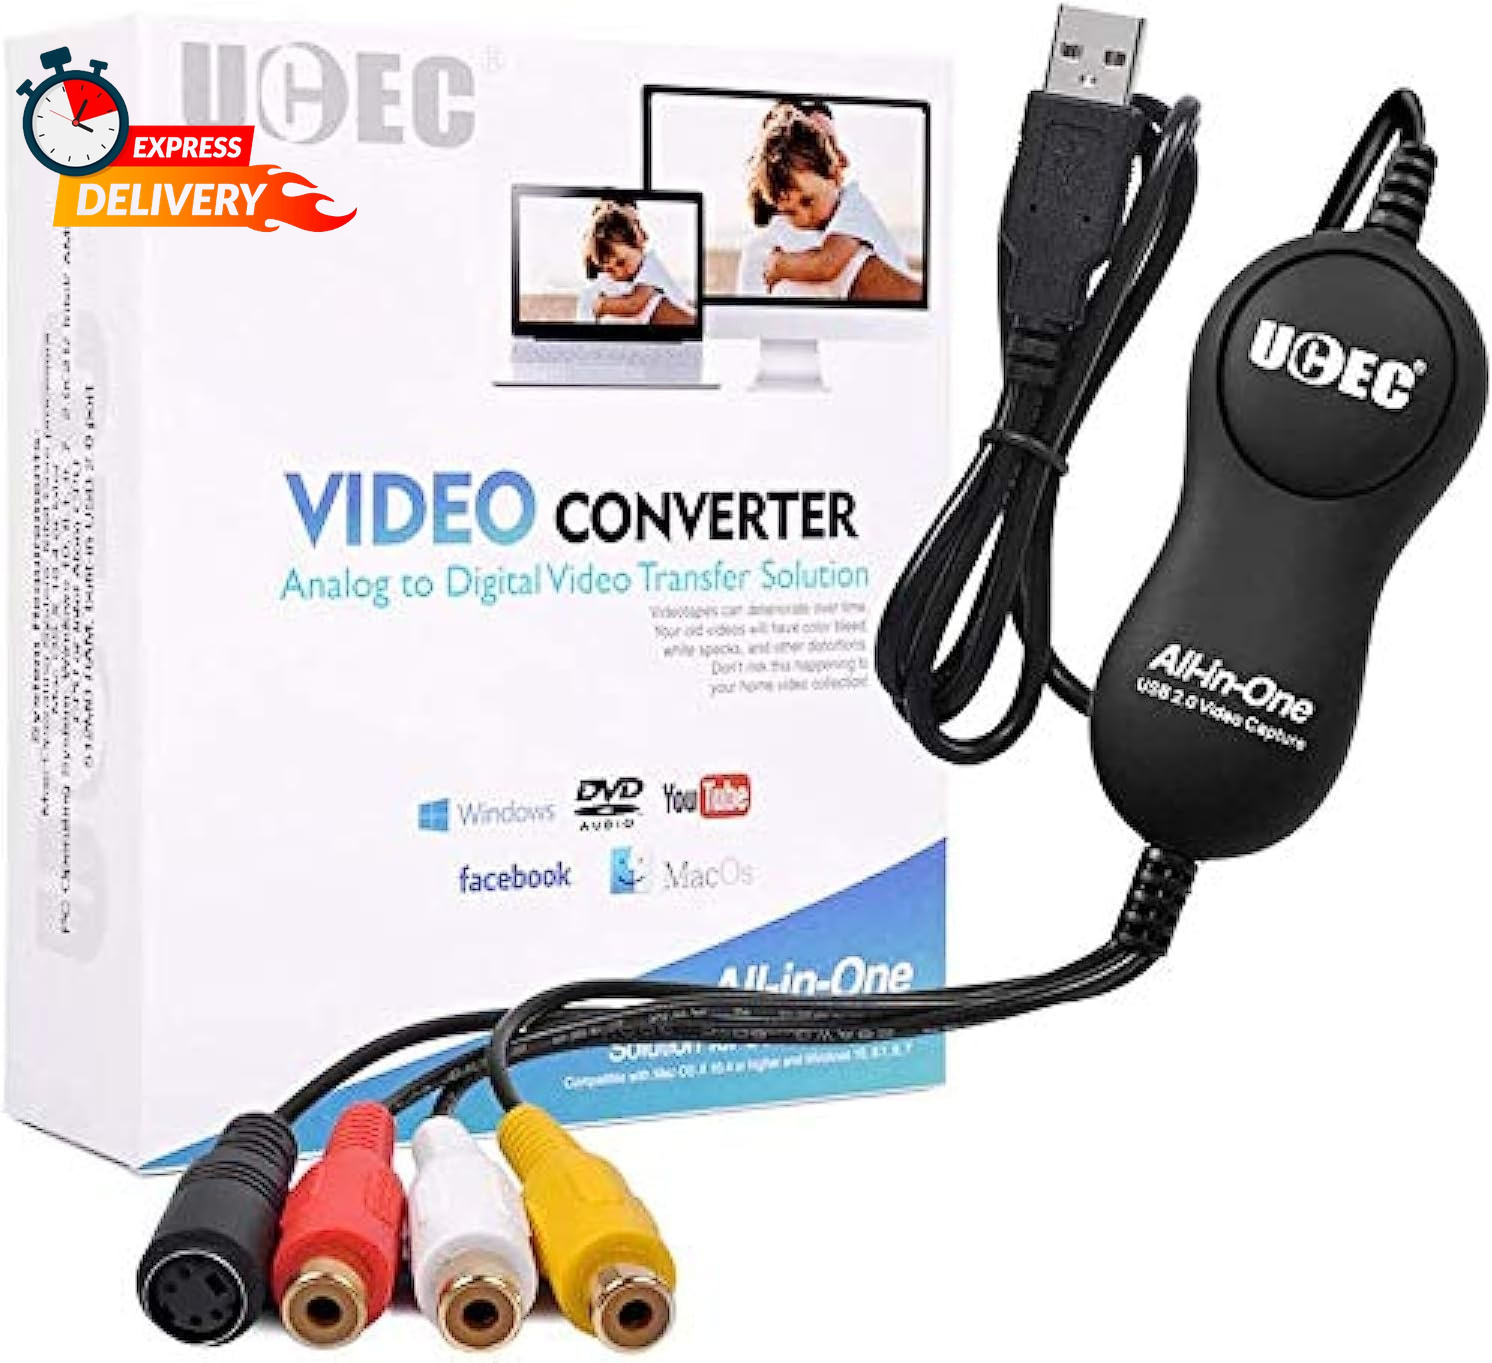 USB 2.0 Video Capture Card Device, VHS VCR TV to DVD Converter for Mac